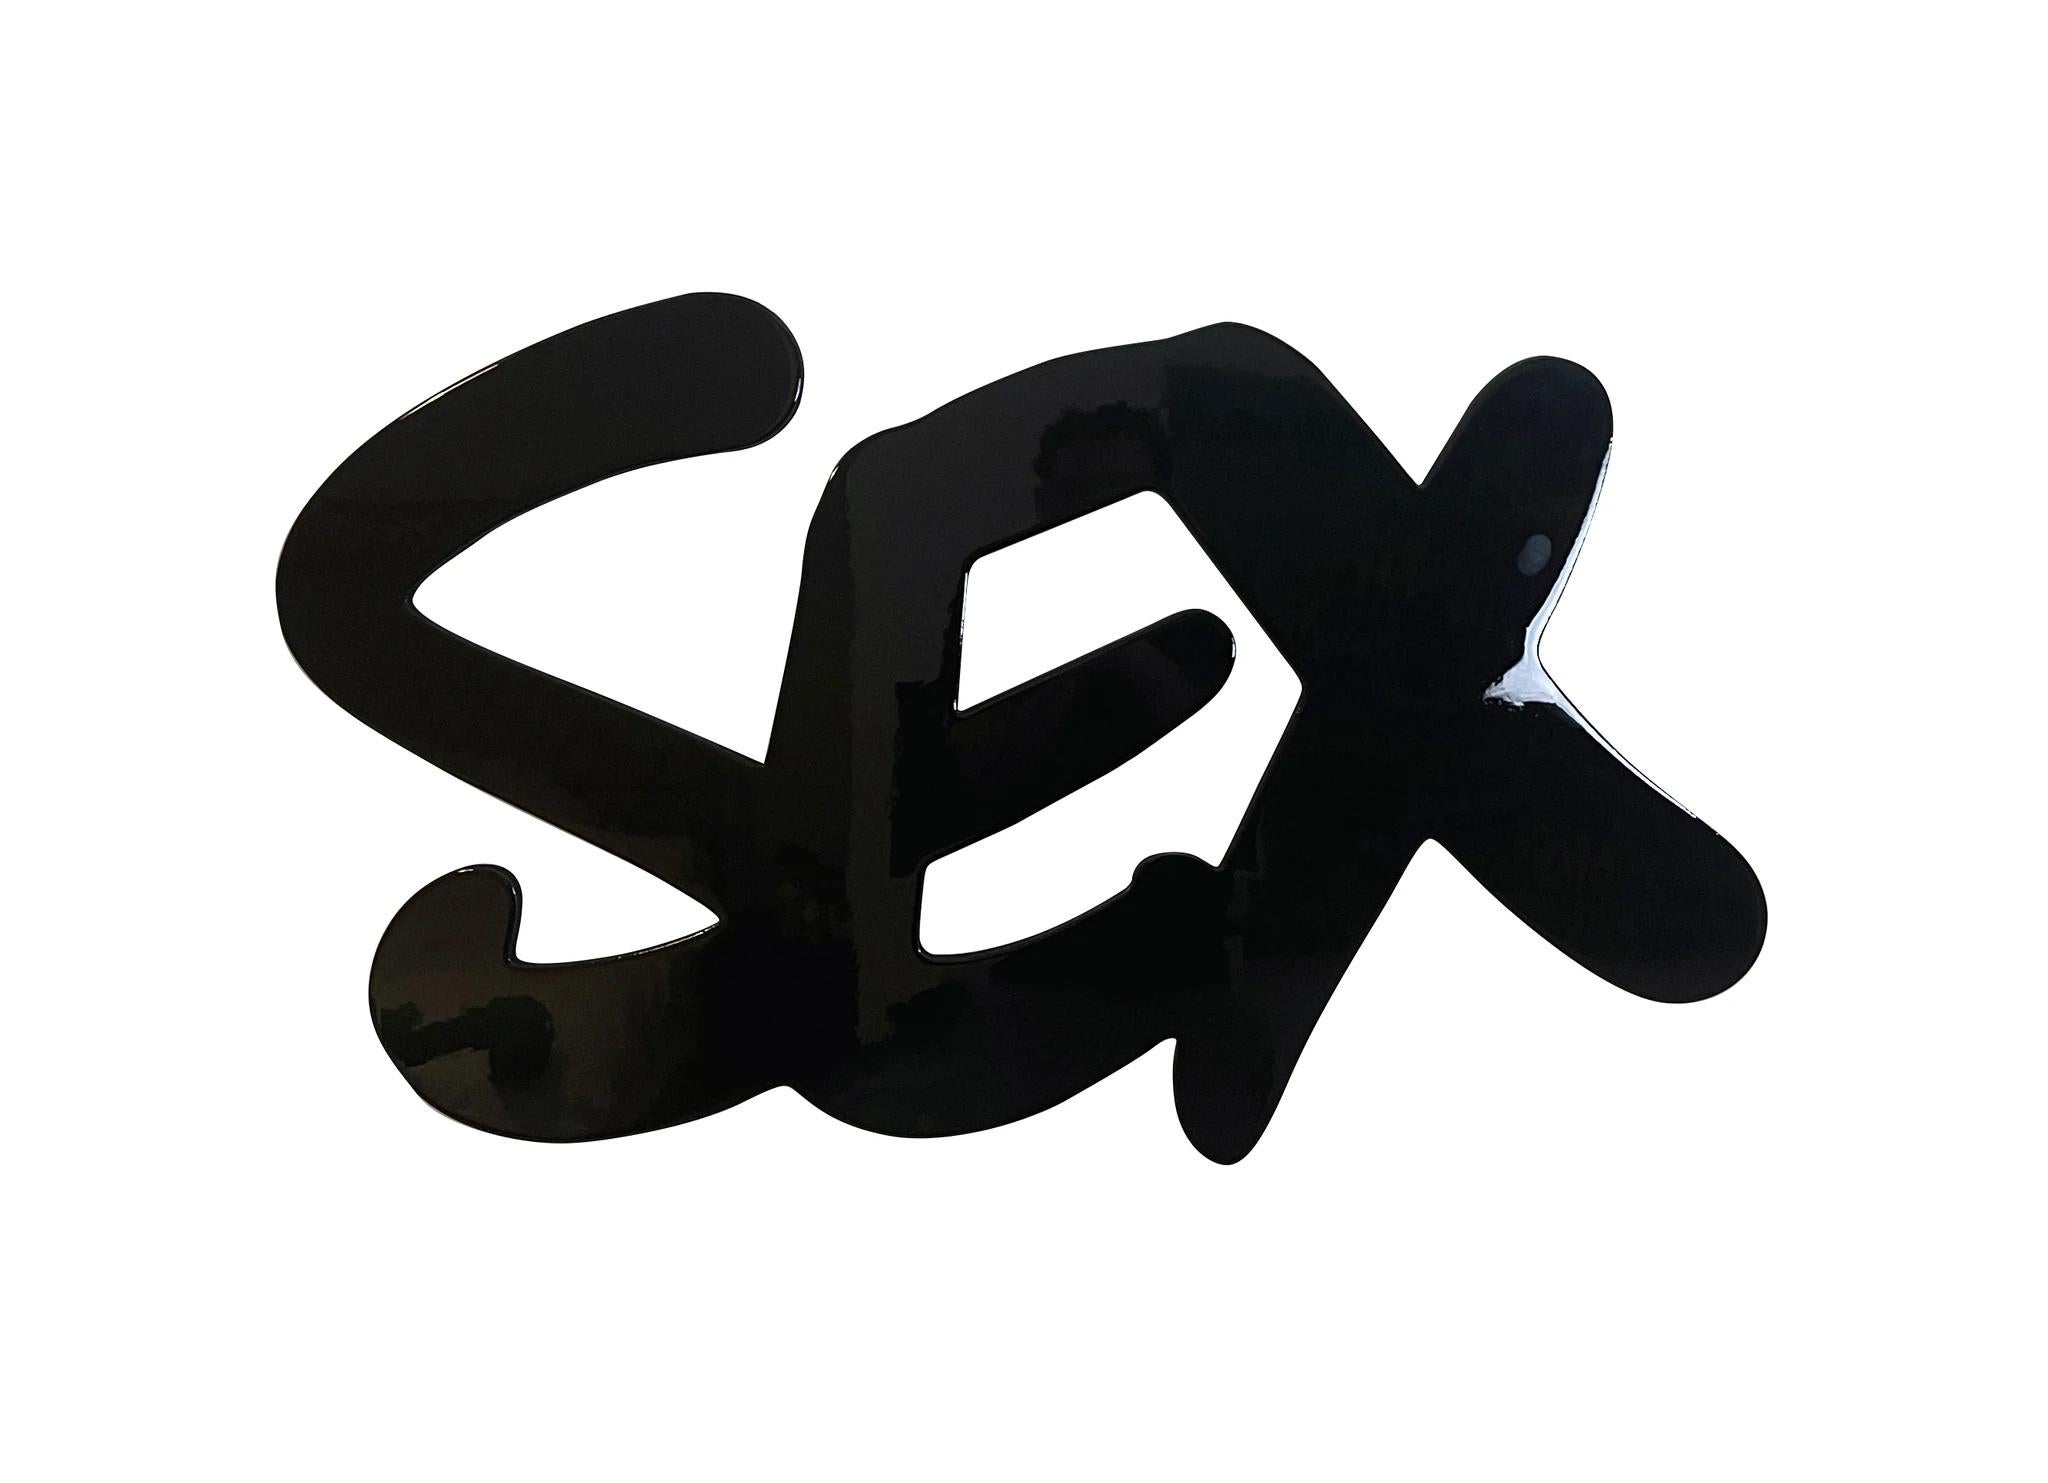 "Sex" Mixed media sculpture 24" x 24" x 1" inch by Shawn Kolodny